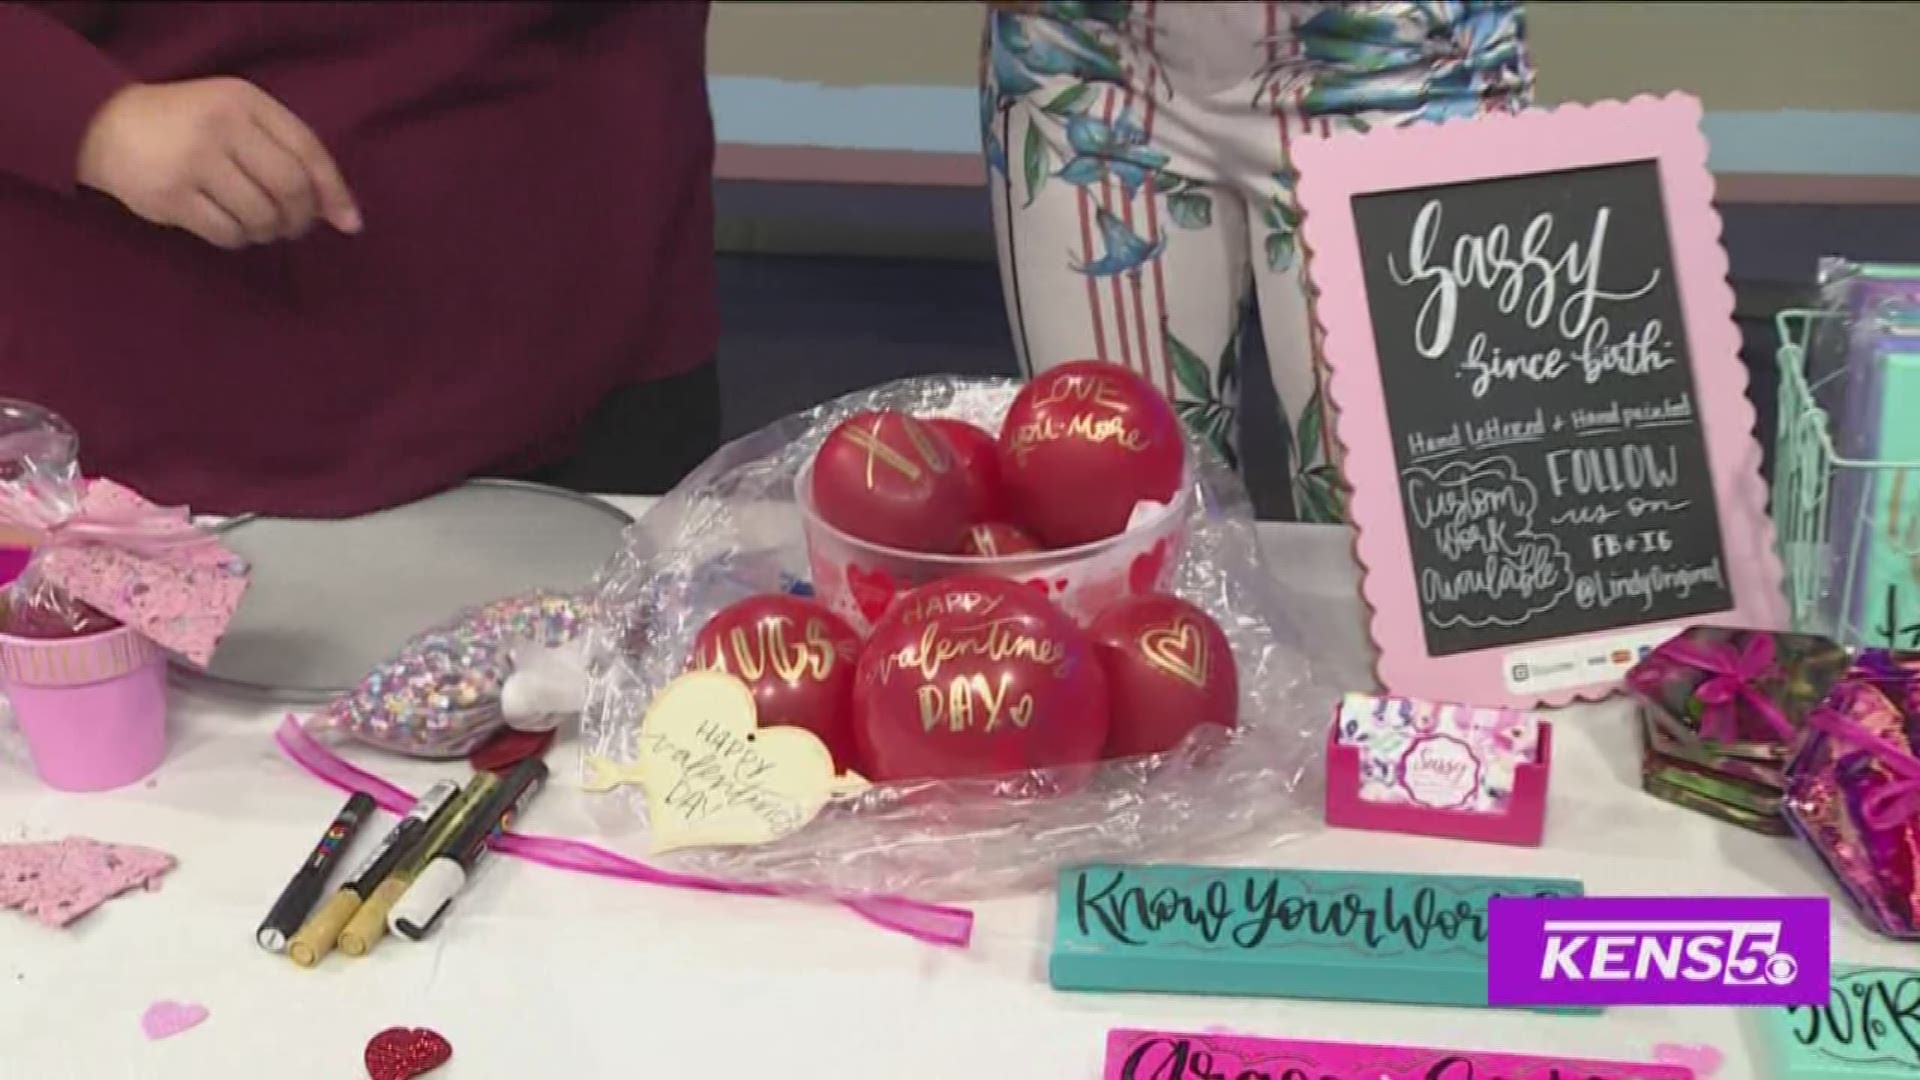 We're getting crafty this morning and making easy DIY gifts for your loved ones